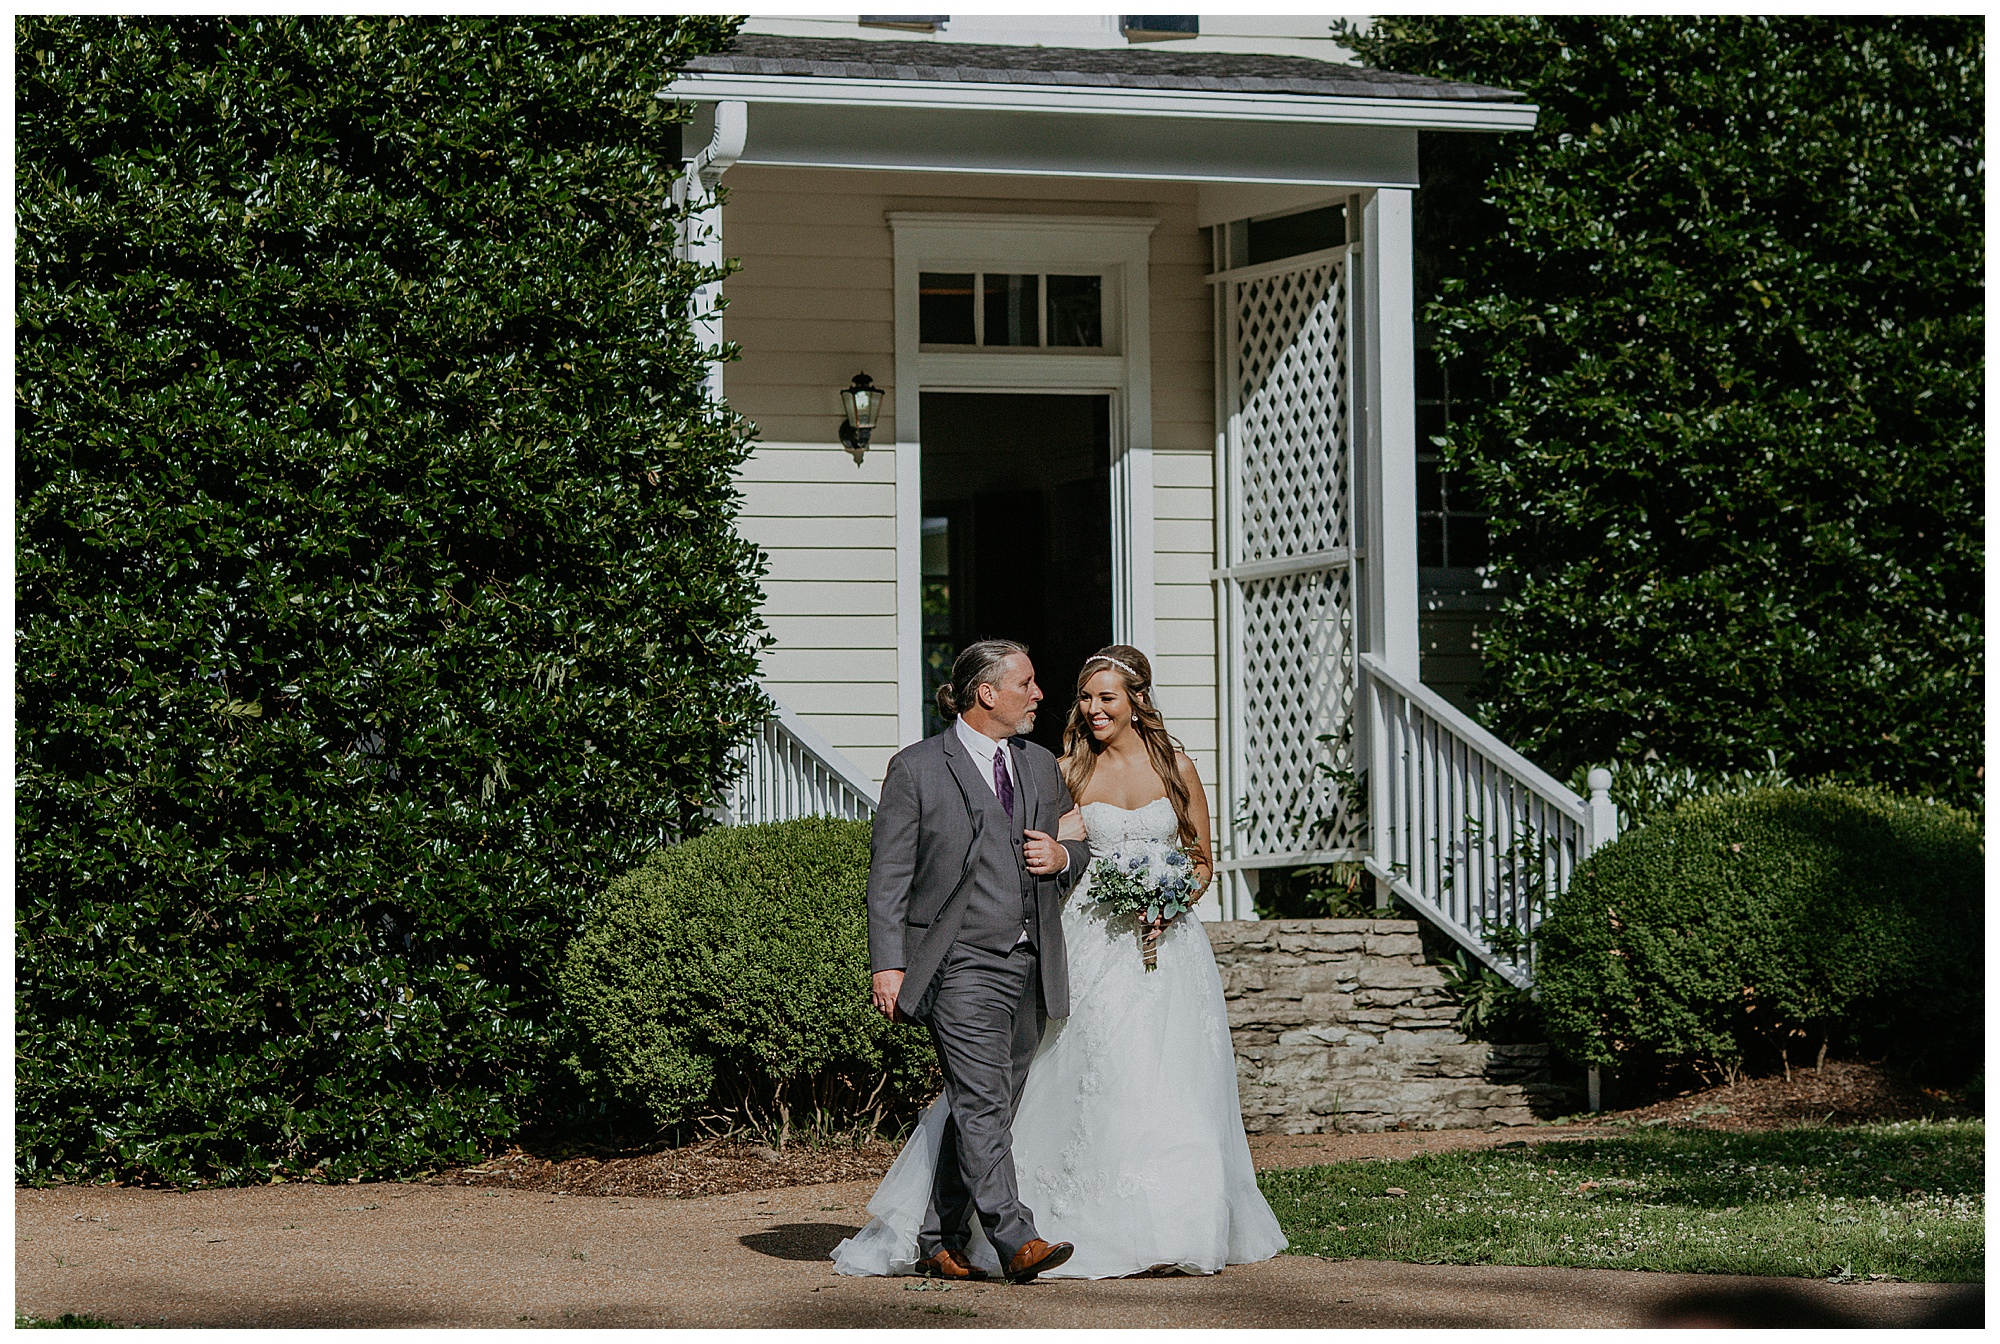 Lauren and her father walk towards the ceremony at the Cool Springs House.